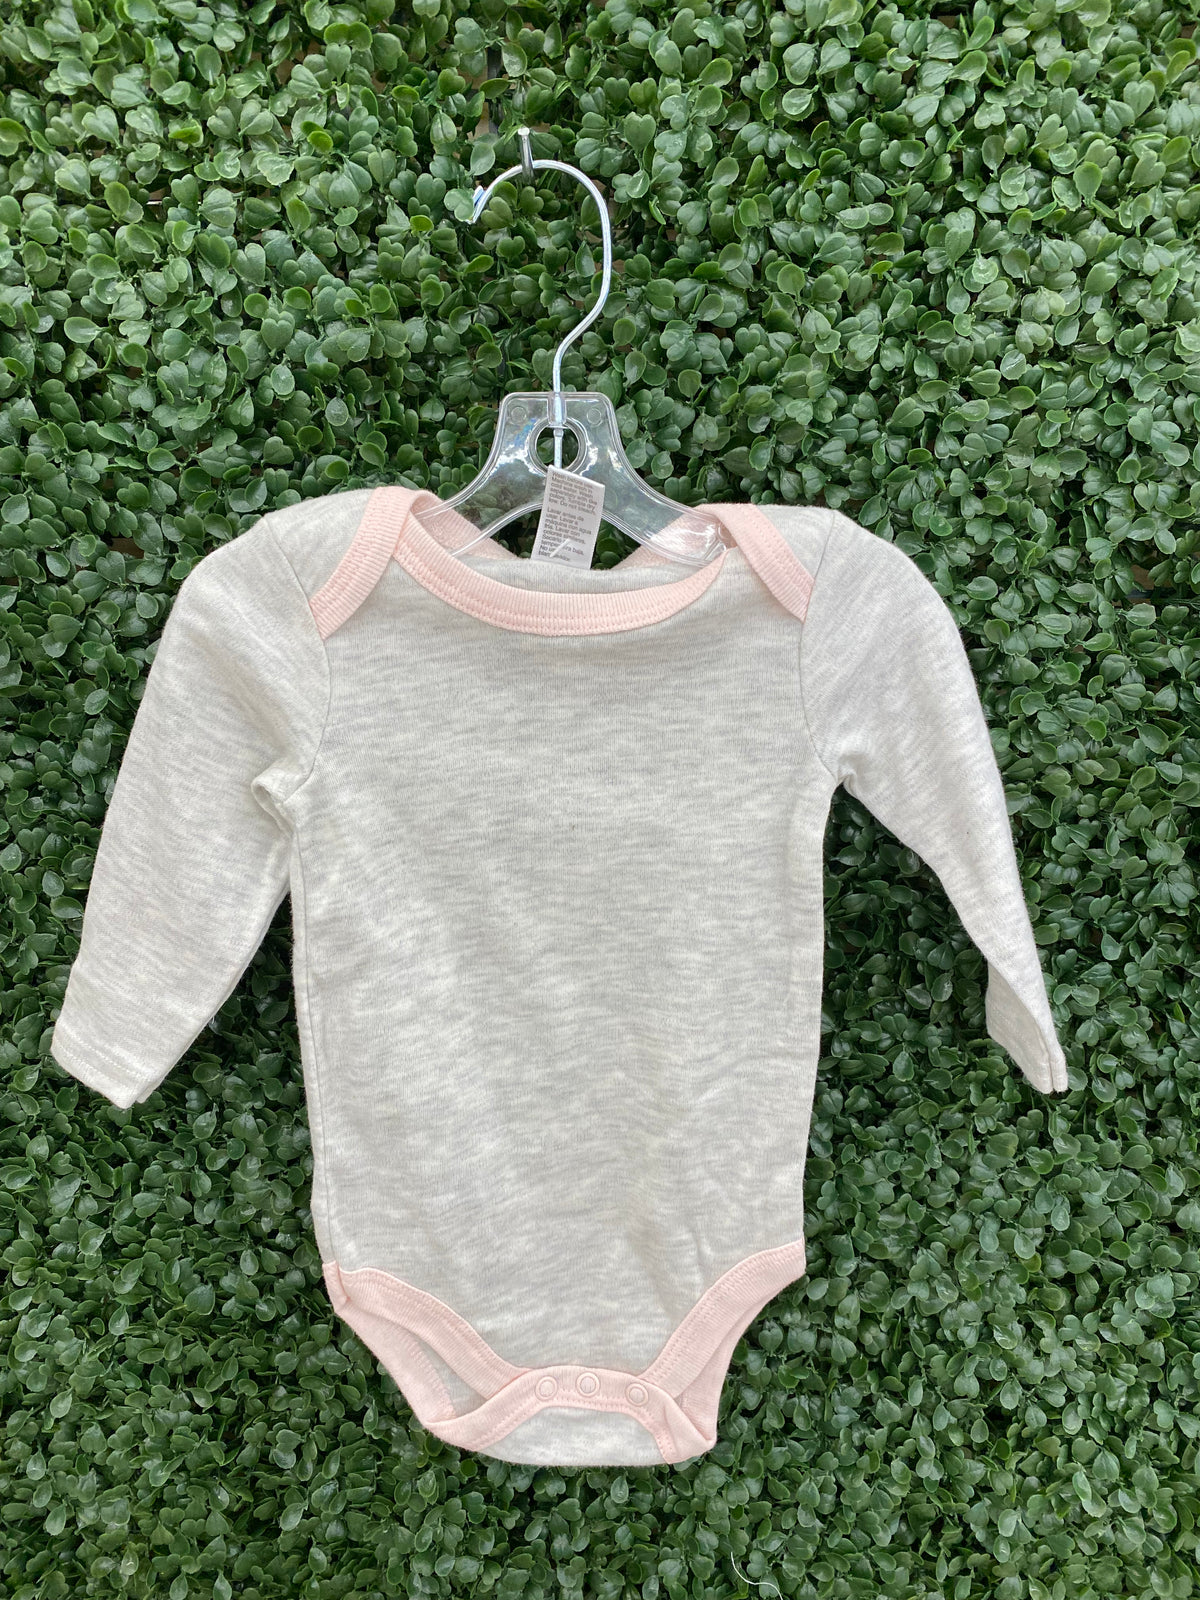 Blissful Blush Grey and Pink Baby Onesie